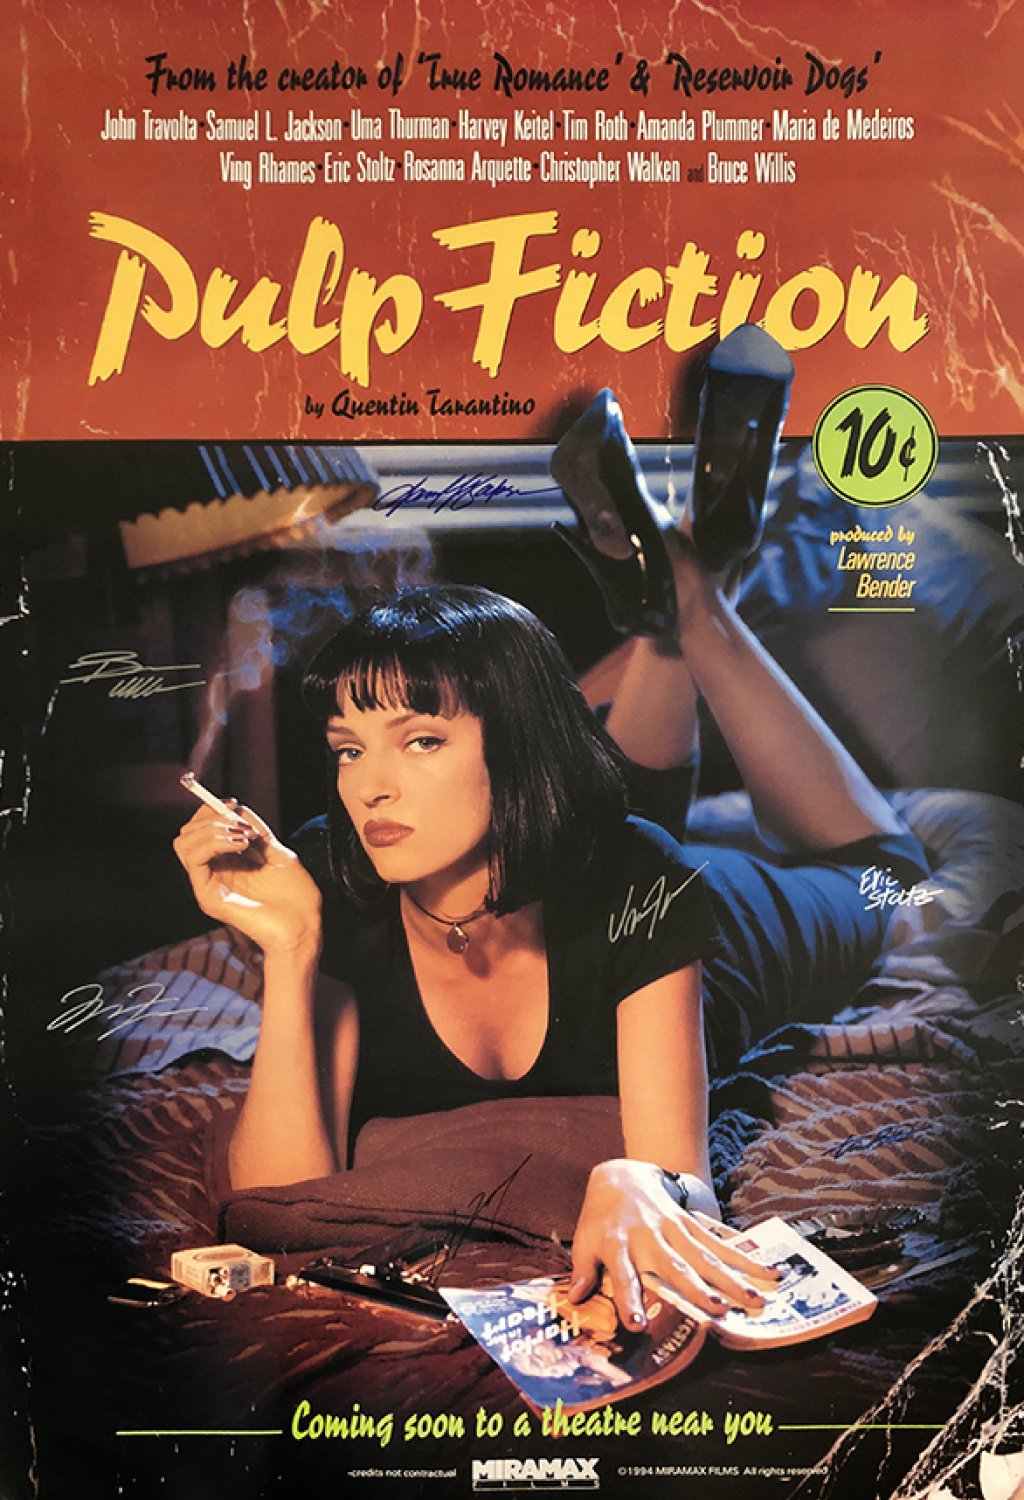 PULP FICTION SIGNED MOVIE POSTER